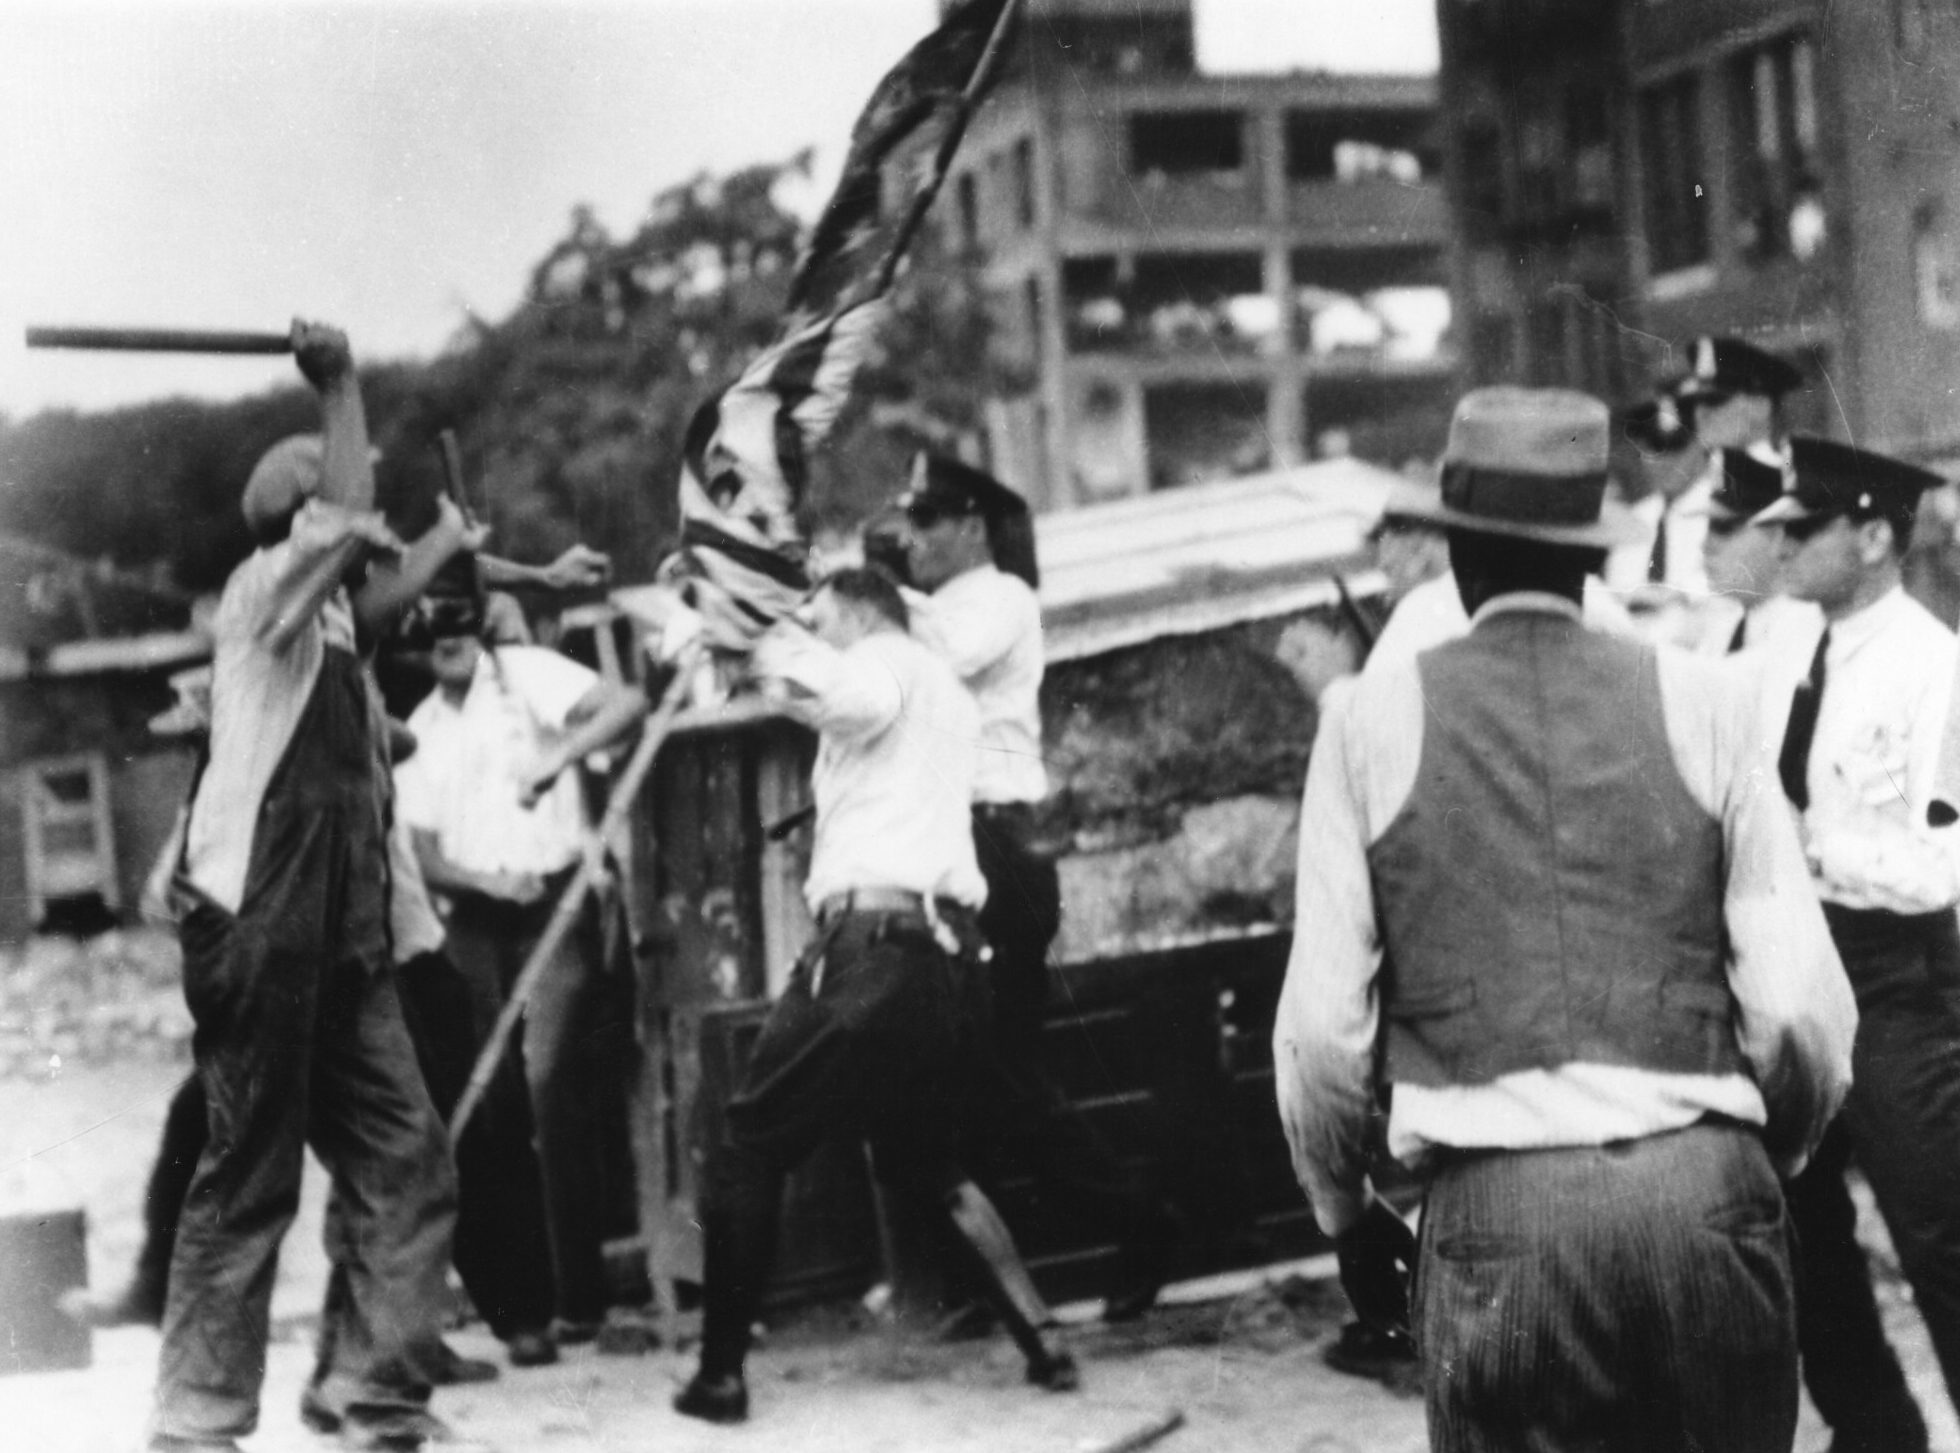 A fight between the marchers and the police during the Bonus Army eviction, July 28, 1932